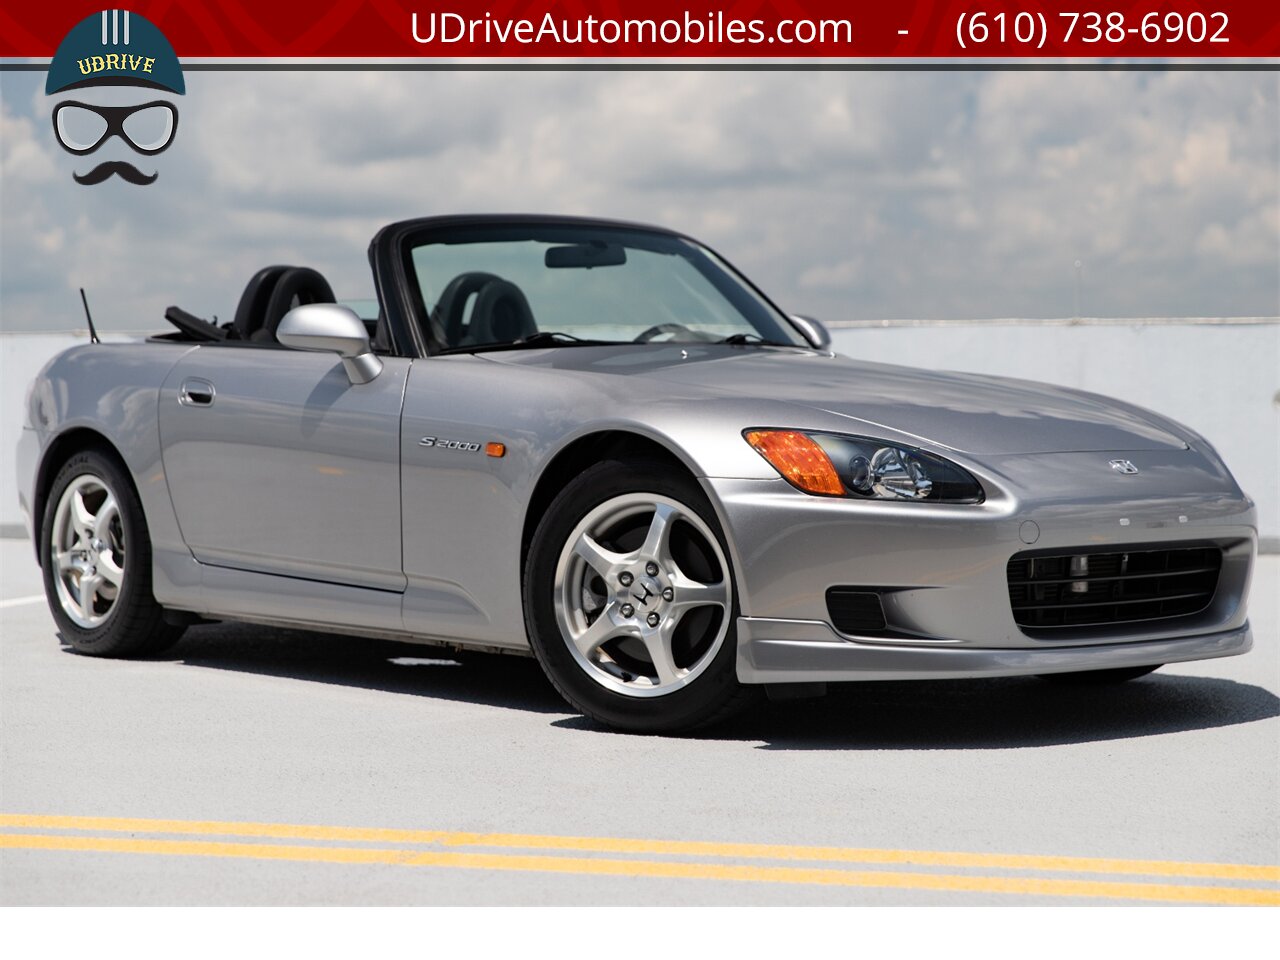 2001 Honda S2000 9k Miles Same Owner Since 2001 Service History   - Photo 4 - West Chester, PA 19382